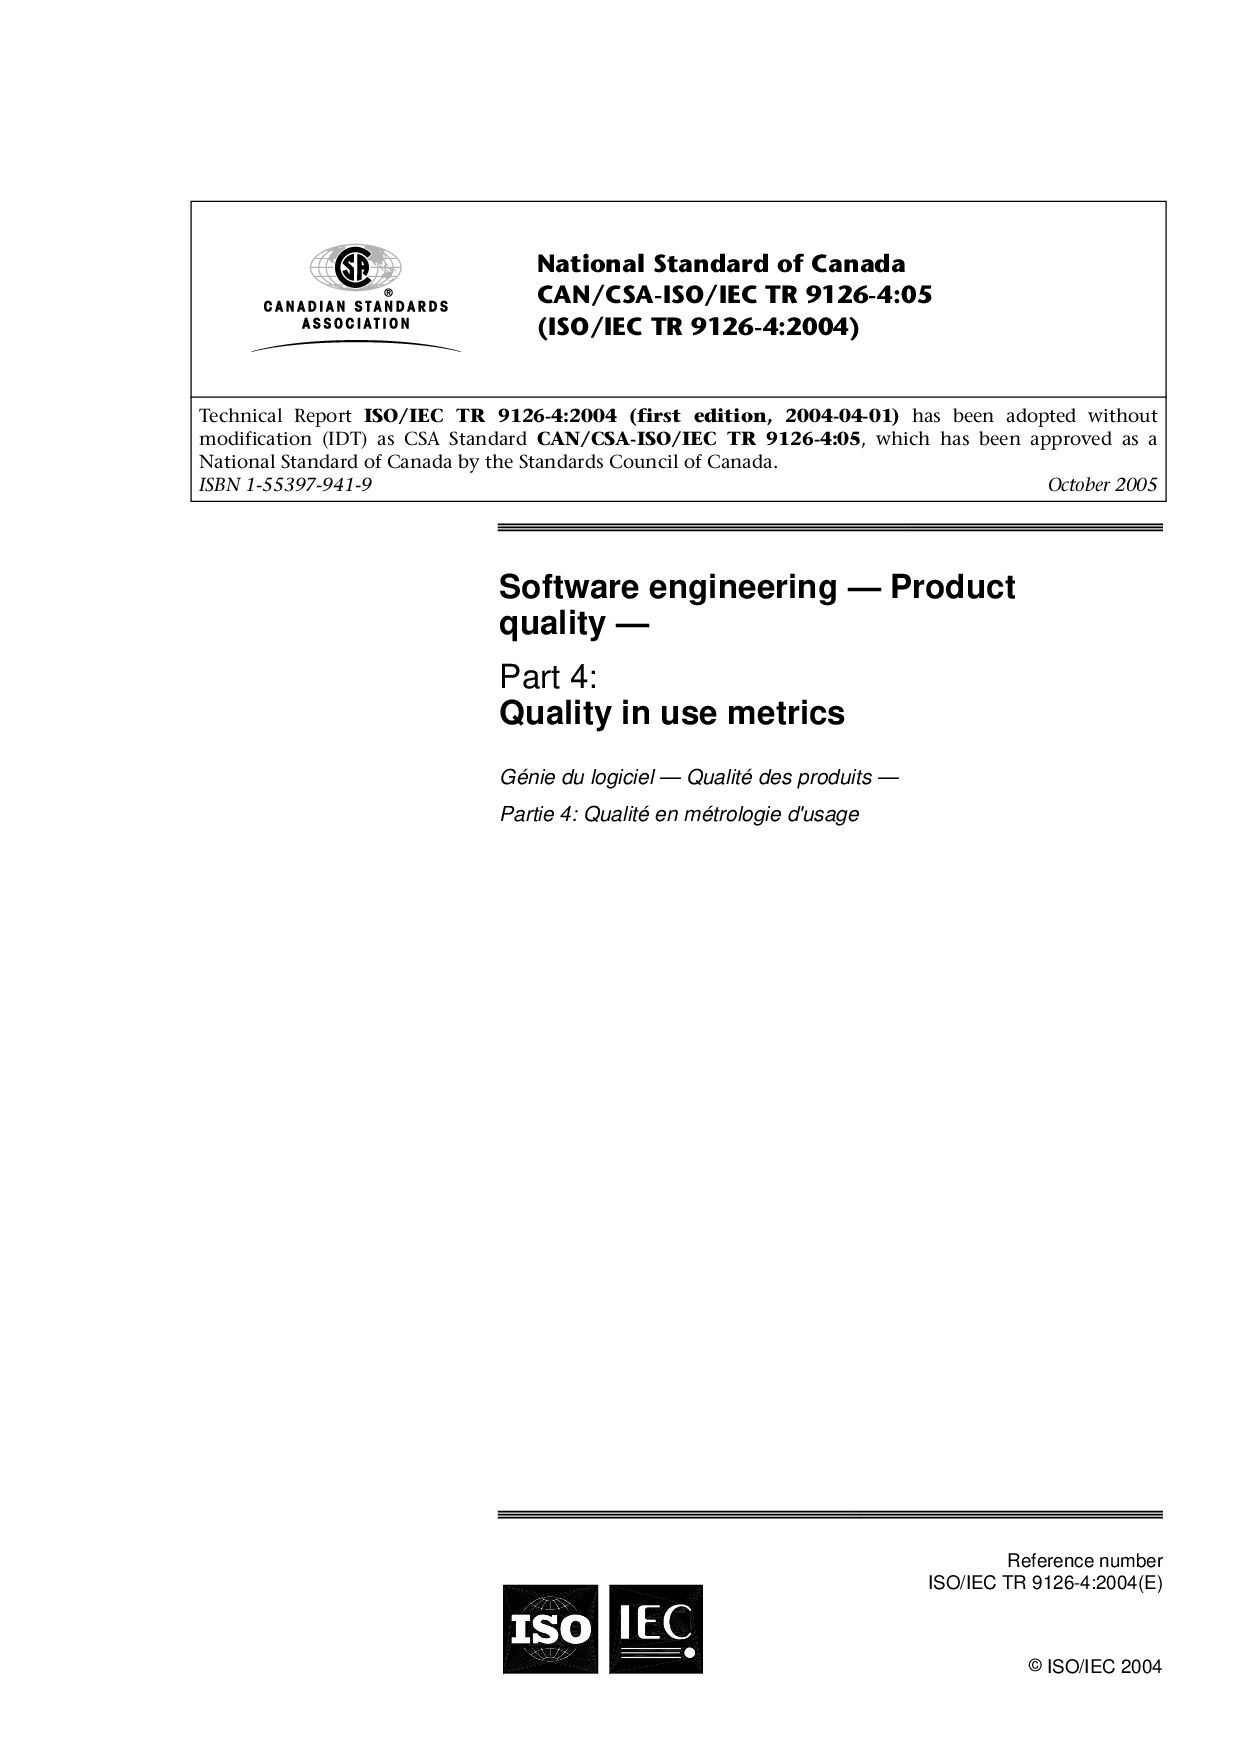 CAN/CSA-ISO/IEC TR 9126-4:2005